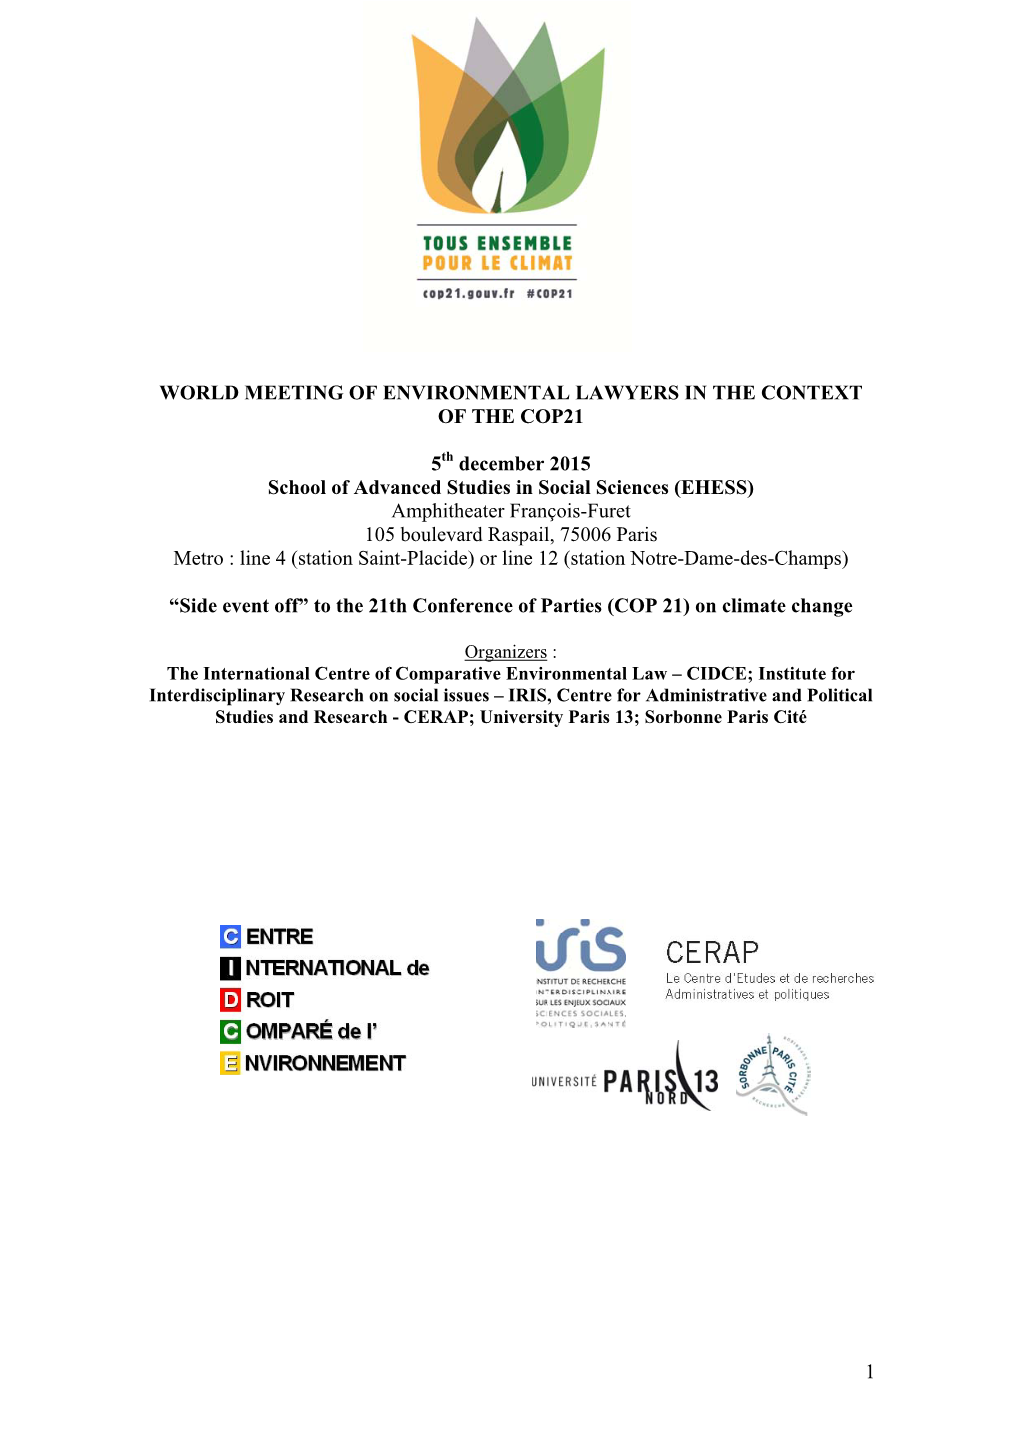 1 WORLD MEETING of ENVIRONMENTAL LAWYERS in the CONTEXT of the COP21 5 December 2015 School of Advanced Studies in Social Scienc